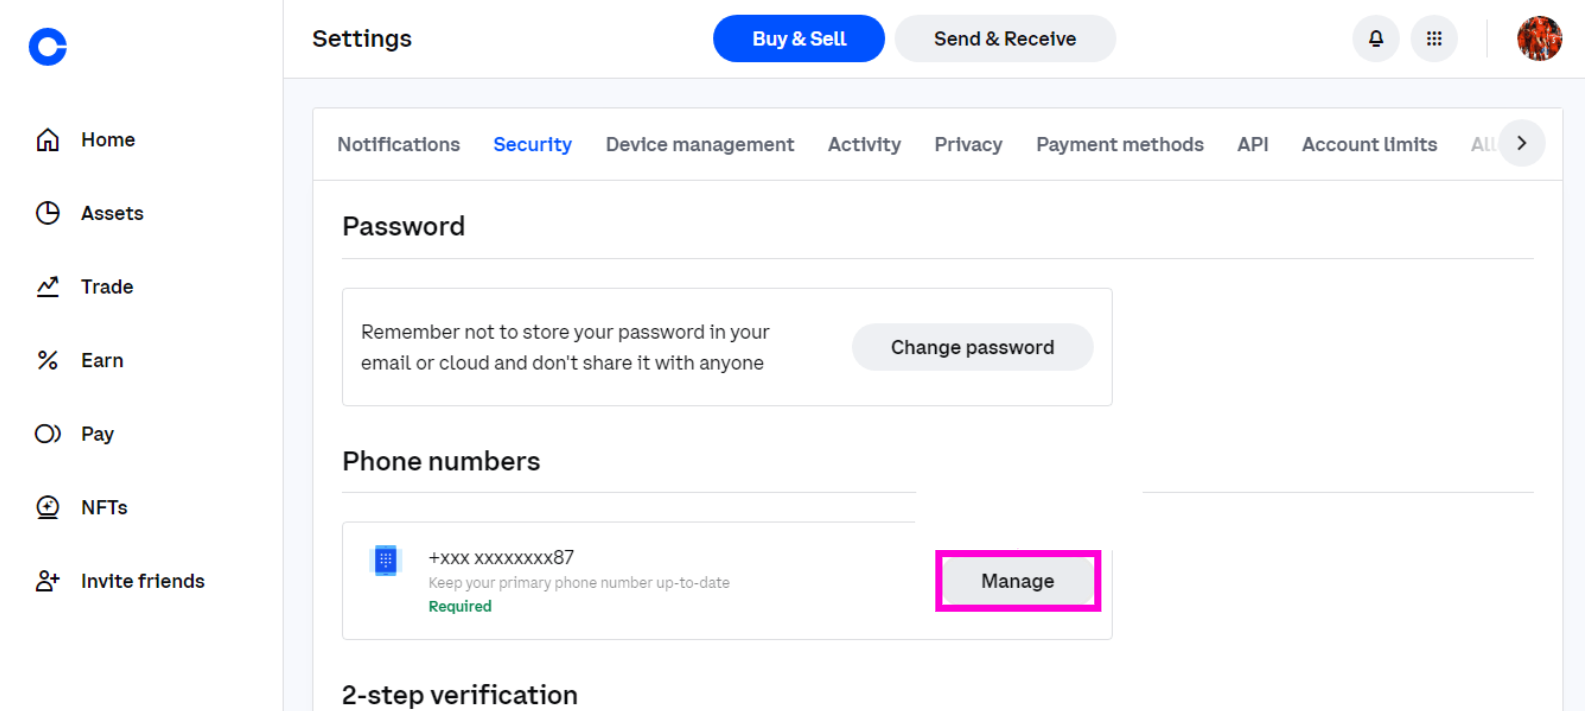 navigate to coinbase phone number management